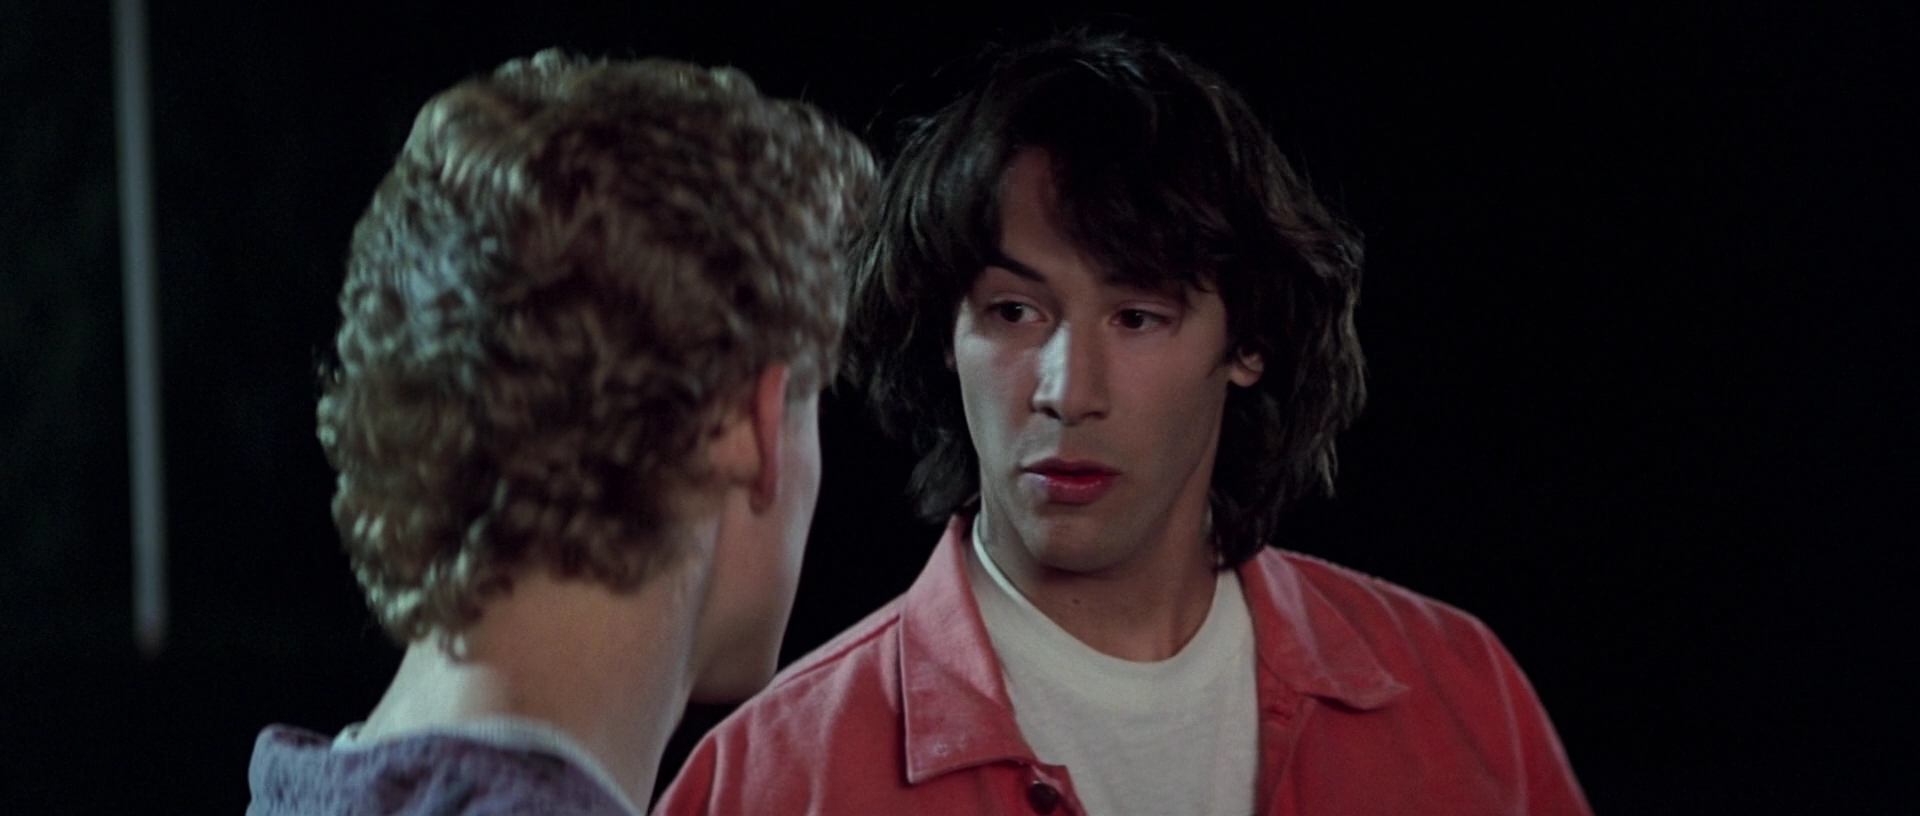 Screen Captures Bill And Teds Excellent Adventure 0262 Keanu Reeves Online Keanu Reeves Photos 